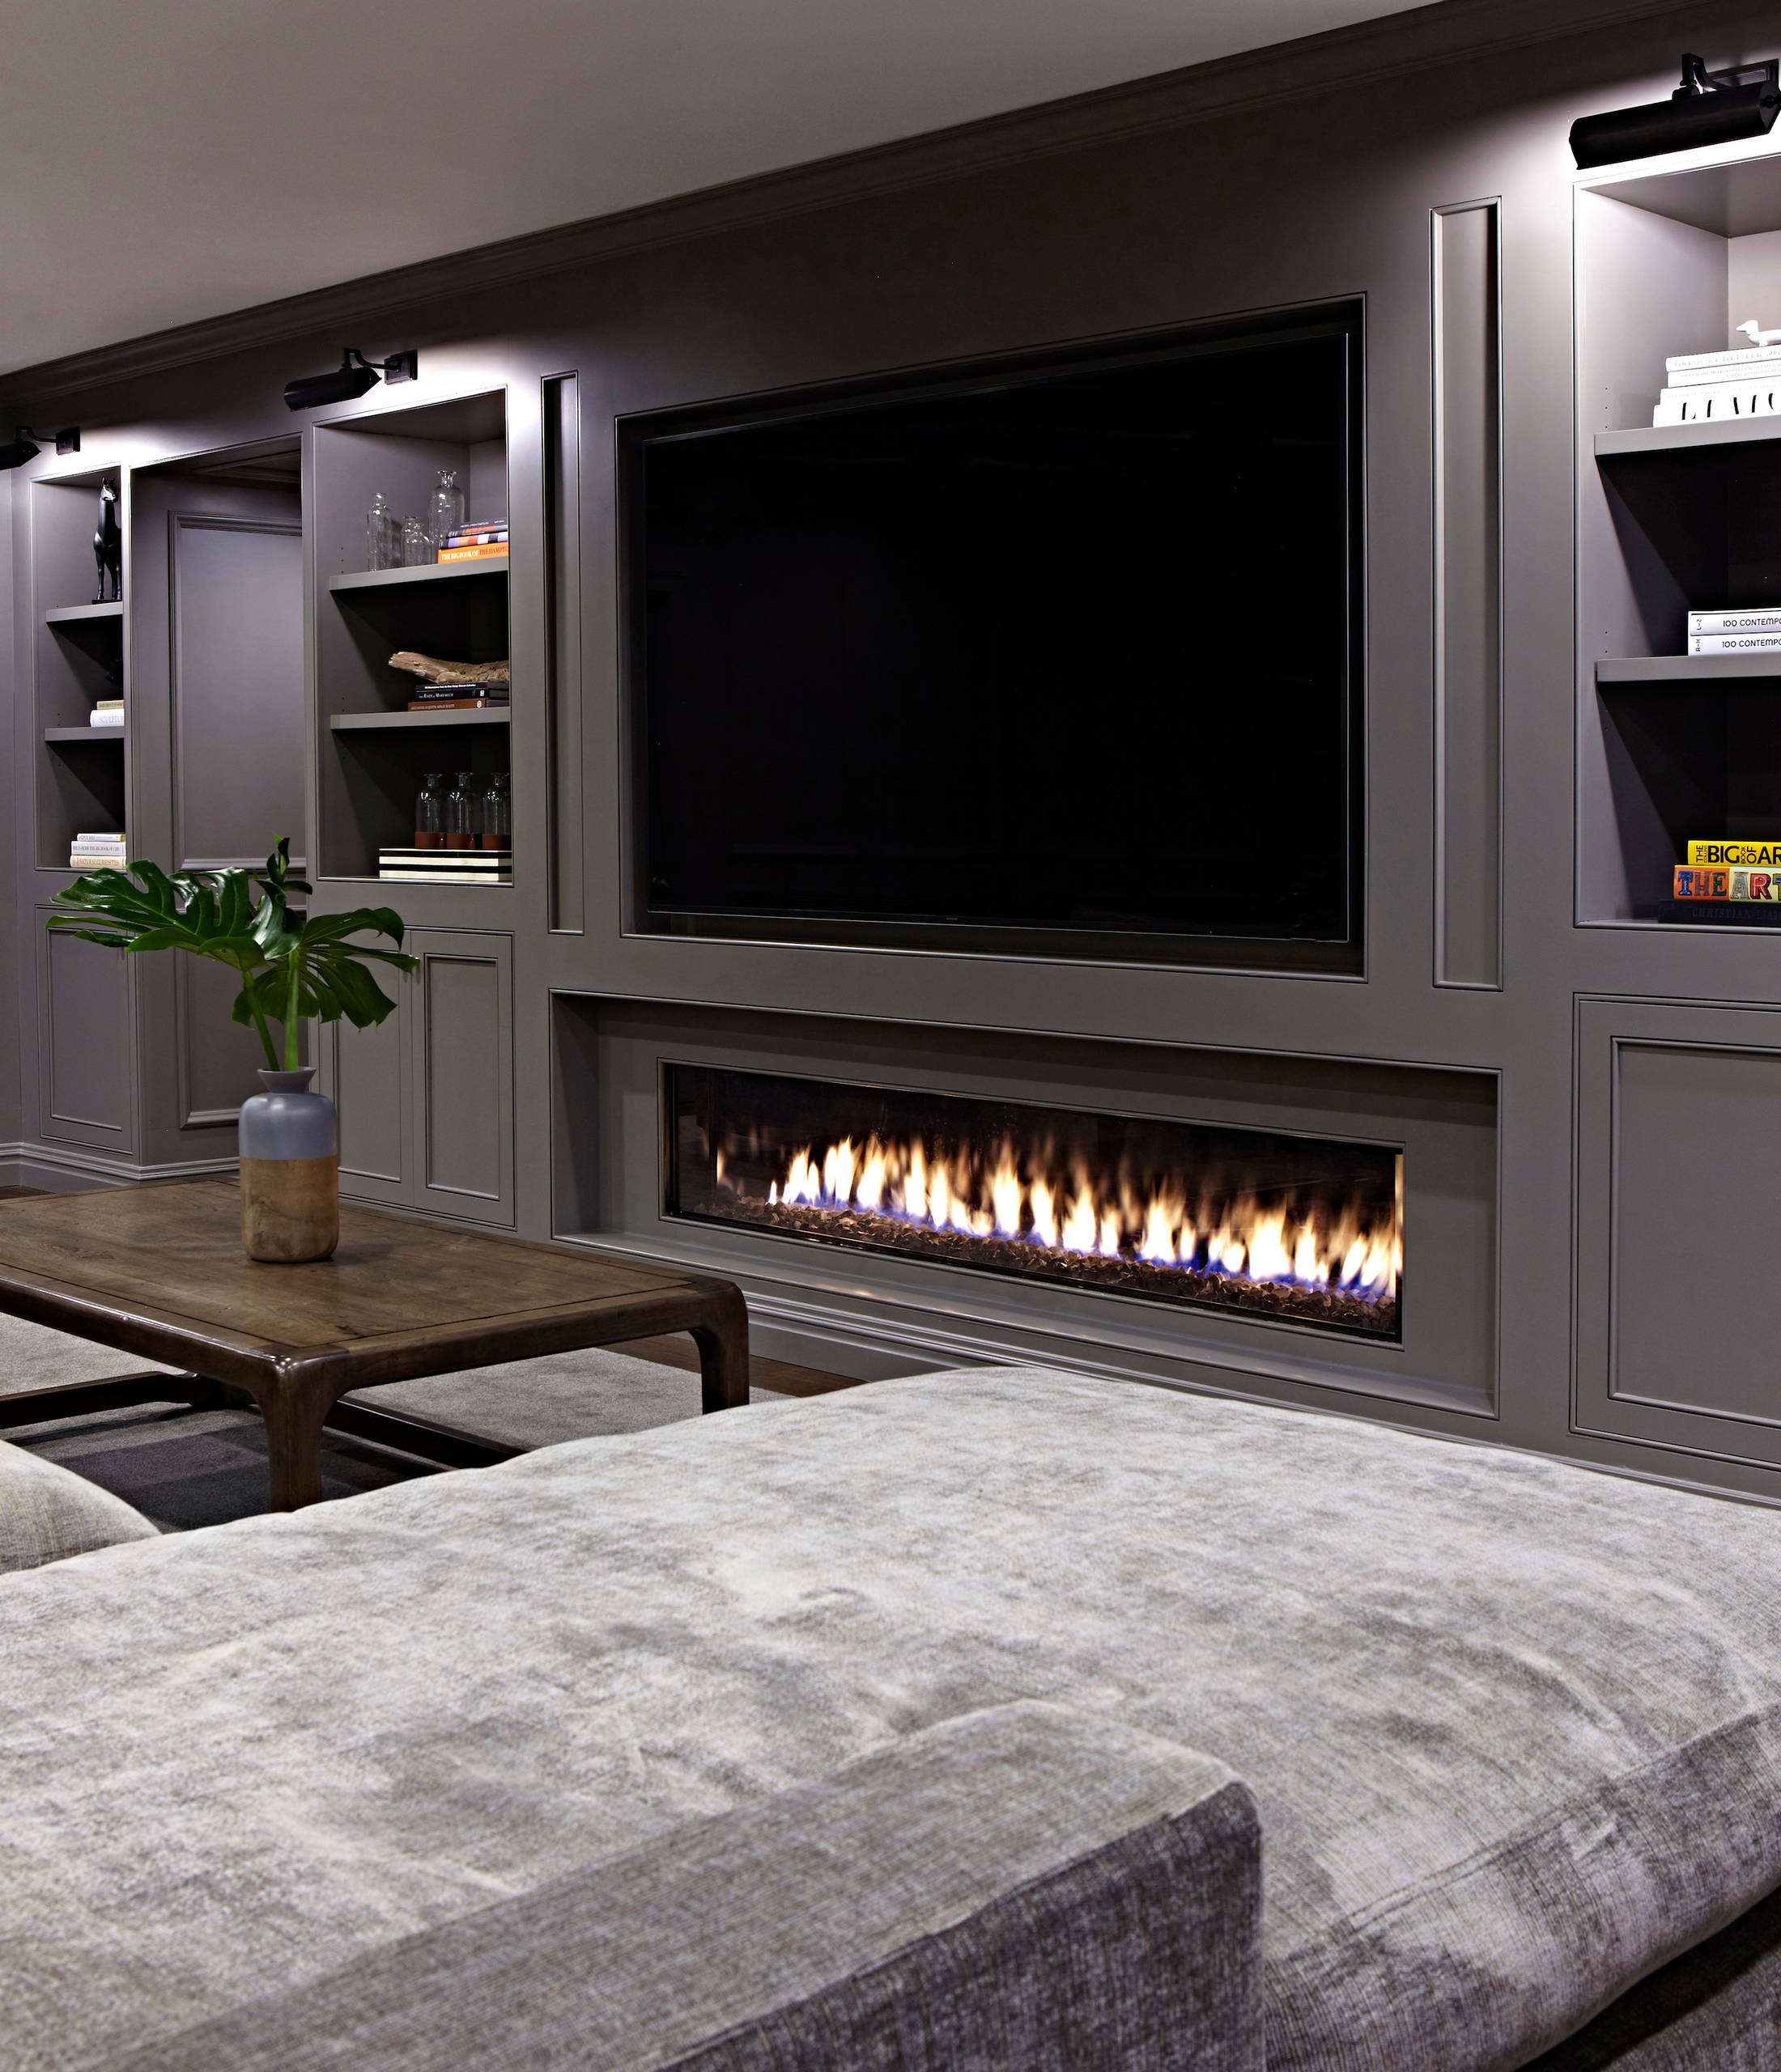 75 Beautiful Basement Pictures Ideas May 2021 Houzz